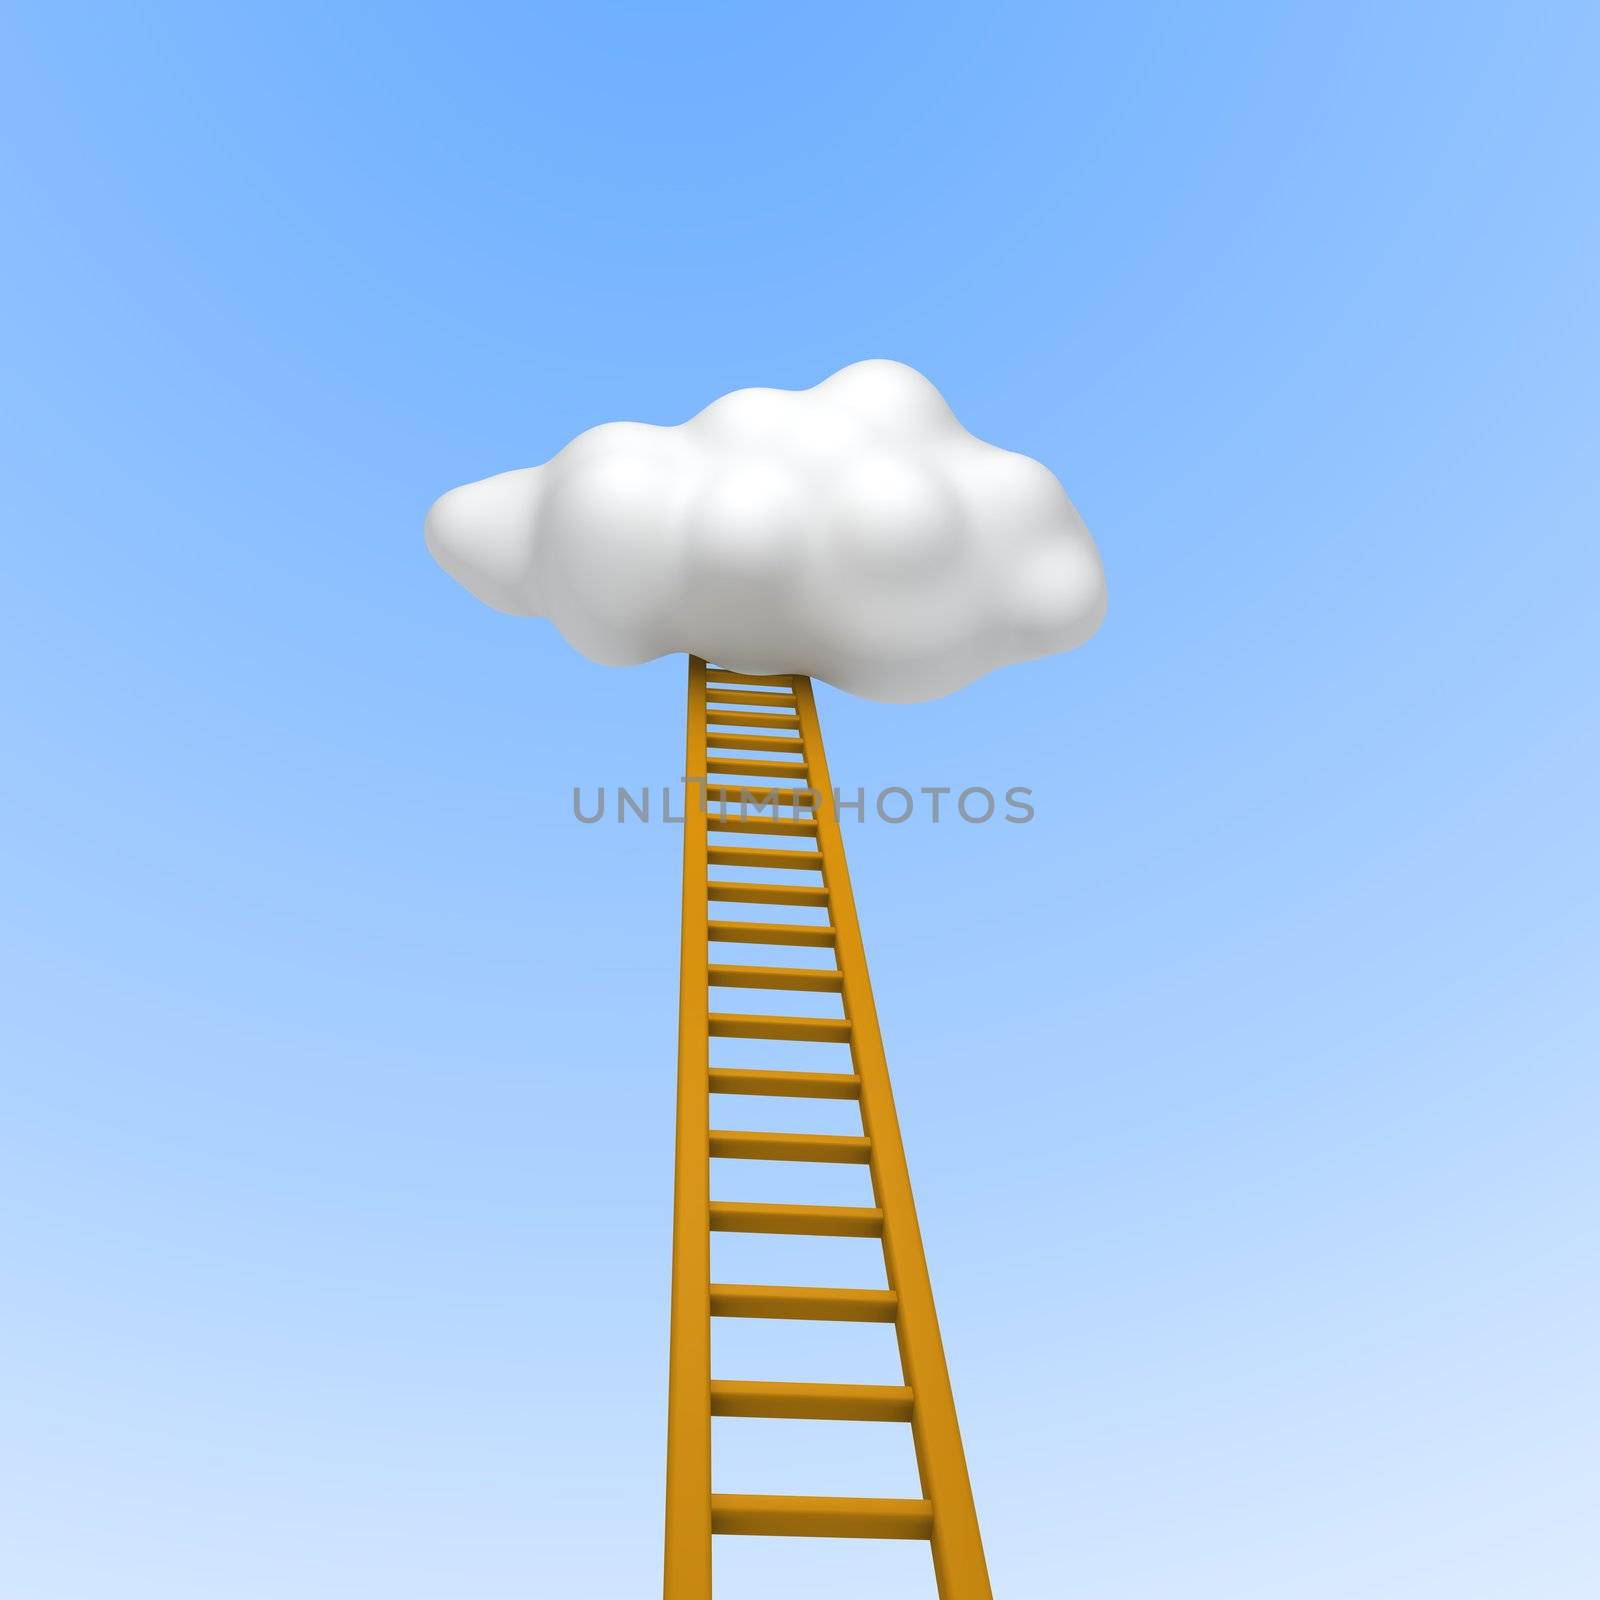 Ladder to the sky by skvoor